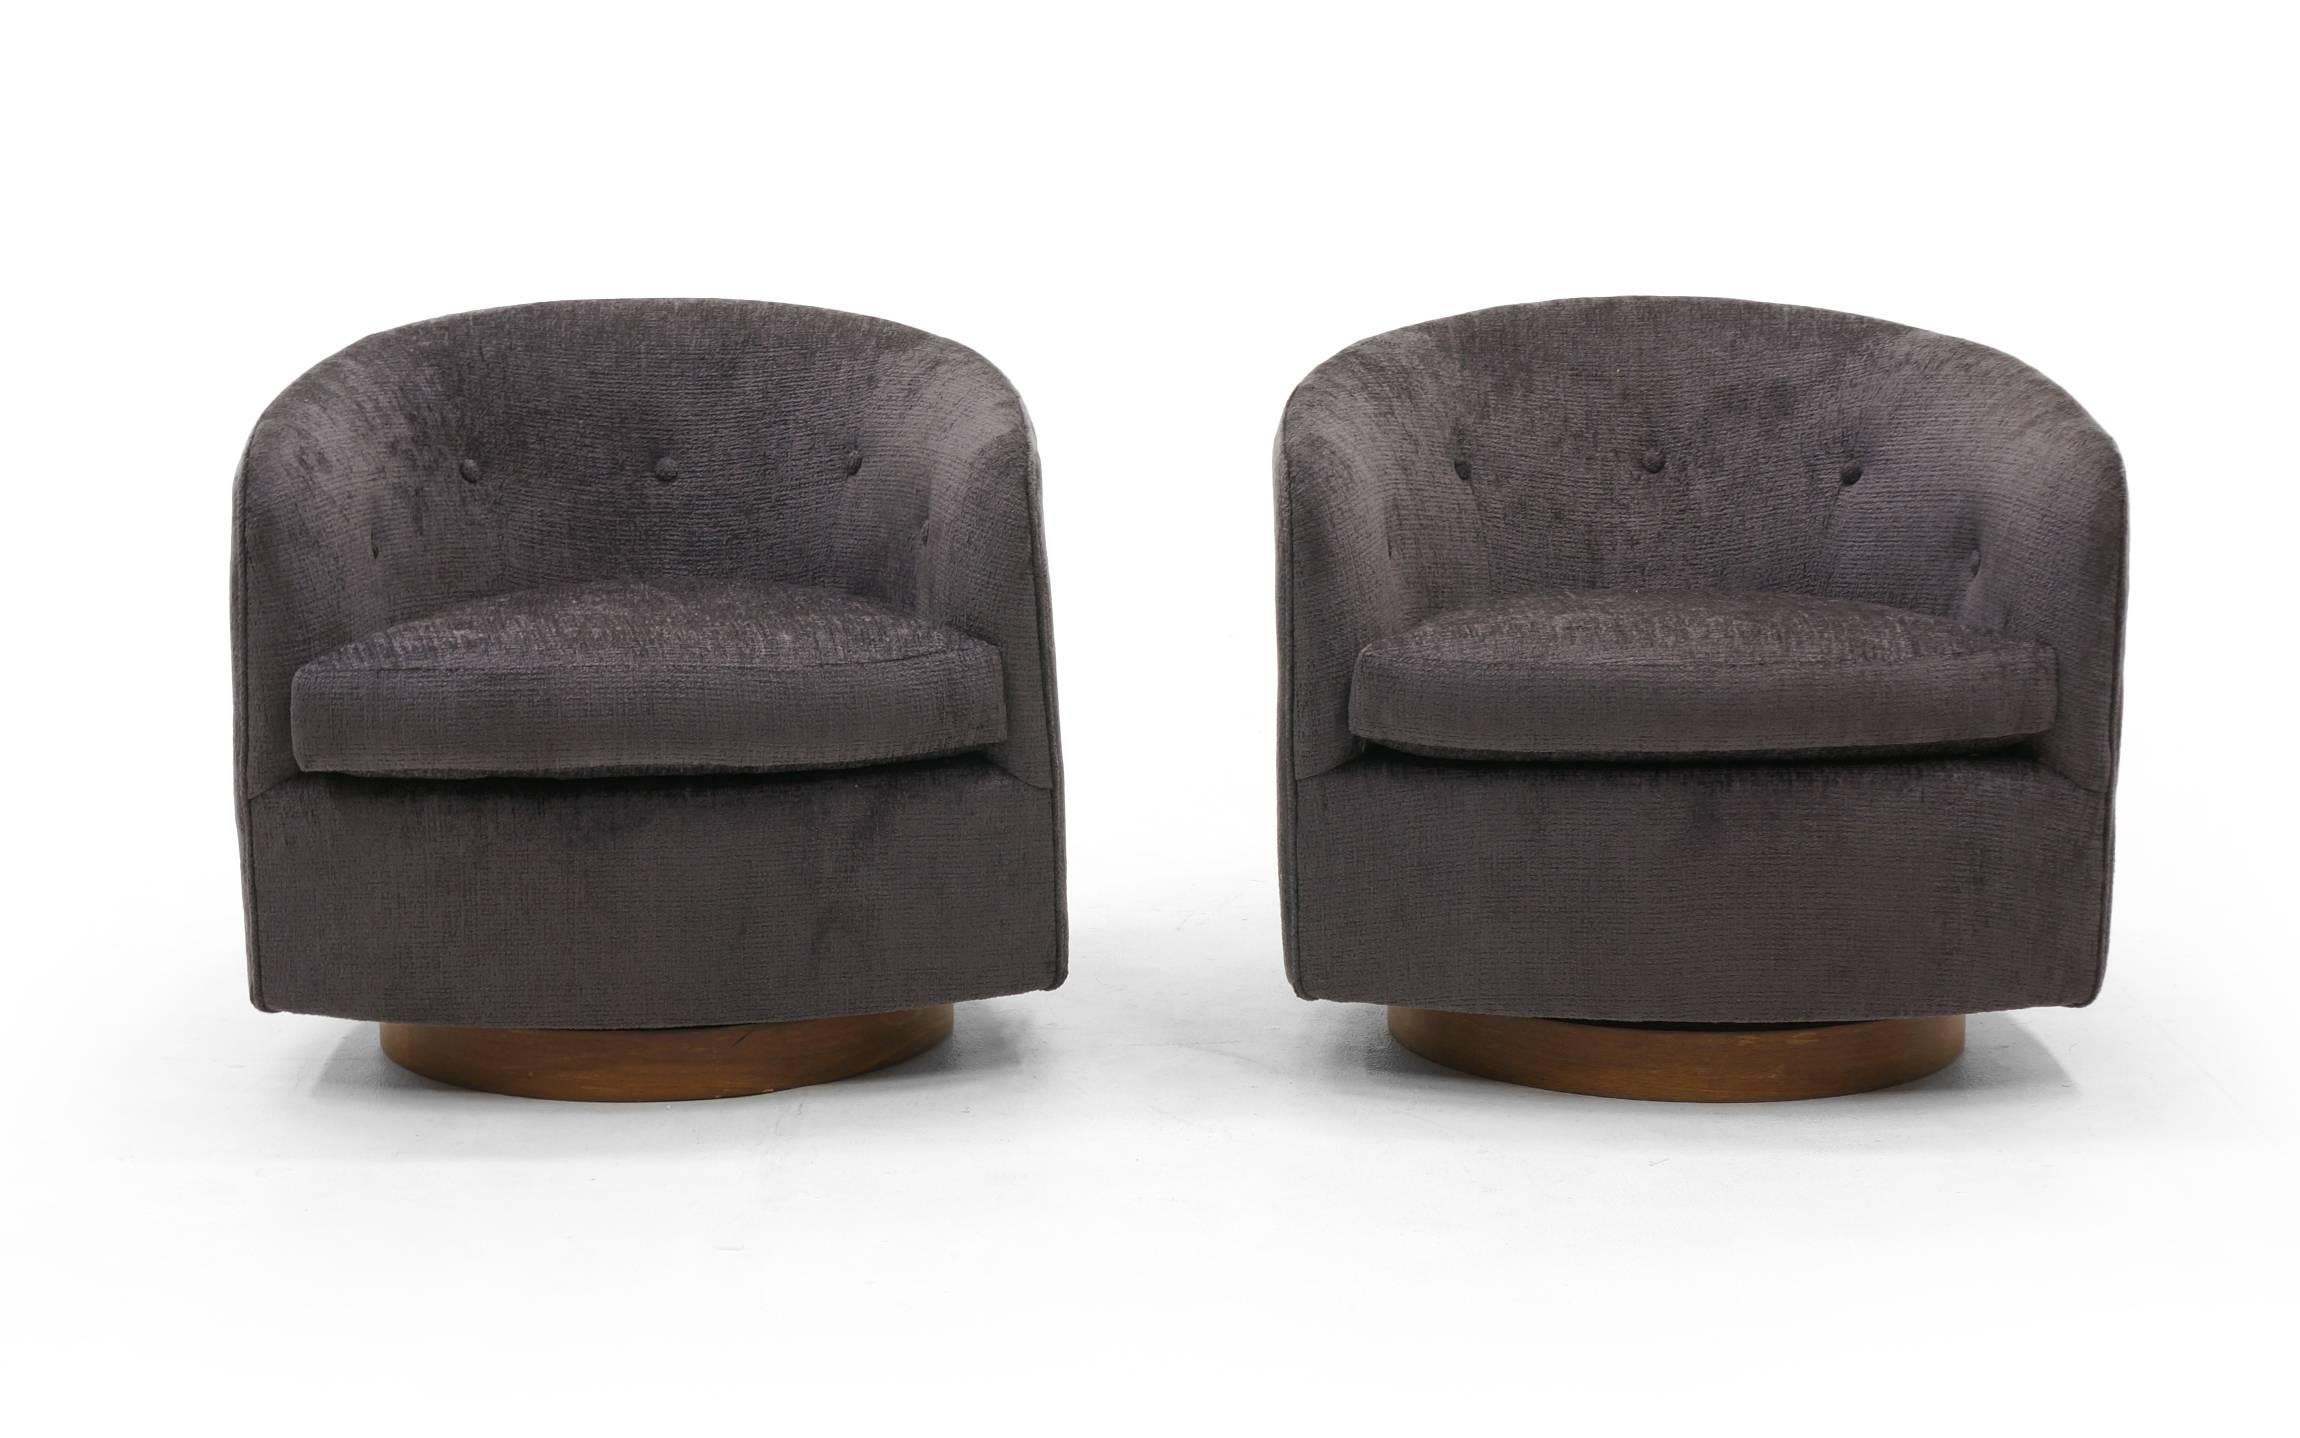 Stunning pair of Milo Baughman for Thayer Coggin's tilt and swivel even arm barrel chairs on walnut bases. These have been completely restored, refinished, and reupholstered in a beautiful, soft, charcoal grey Robert Allen Chenille fabric. The